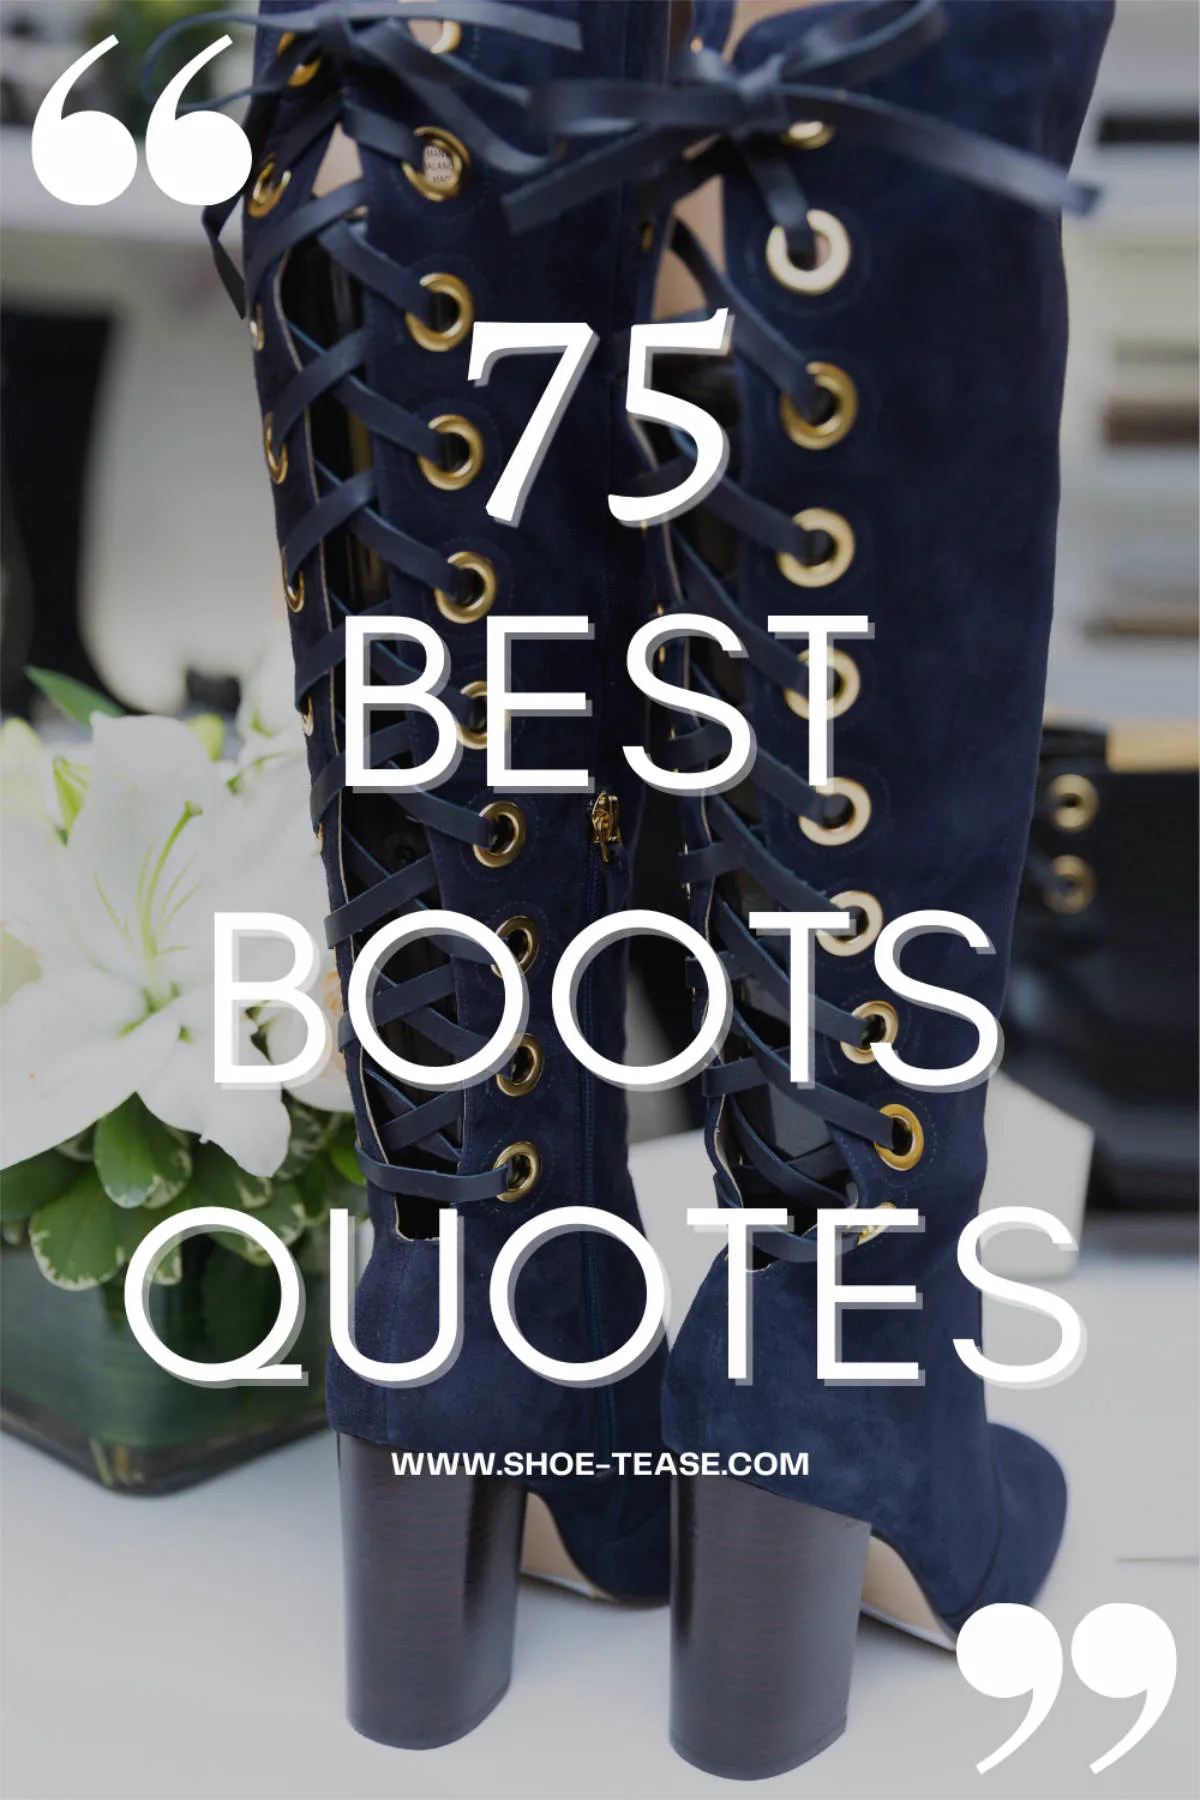 Text 75 best boots quotes over navy knee boots with corset fastening.